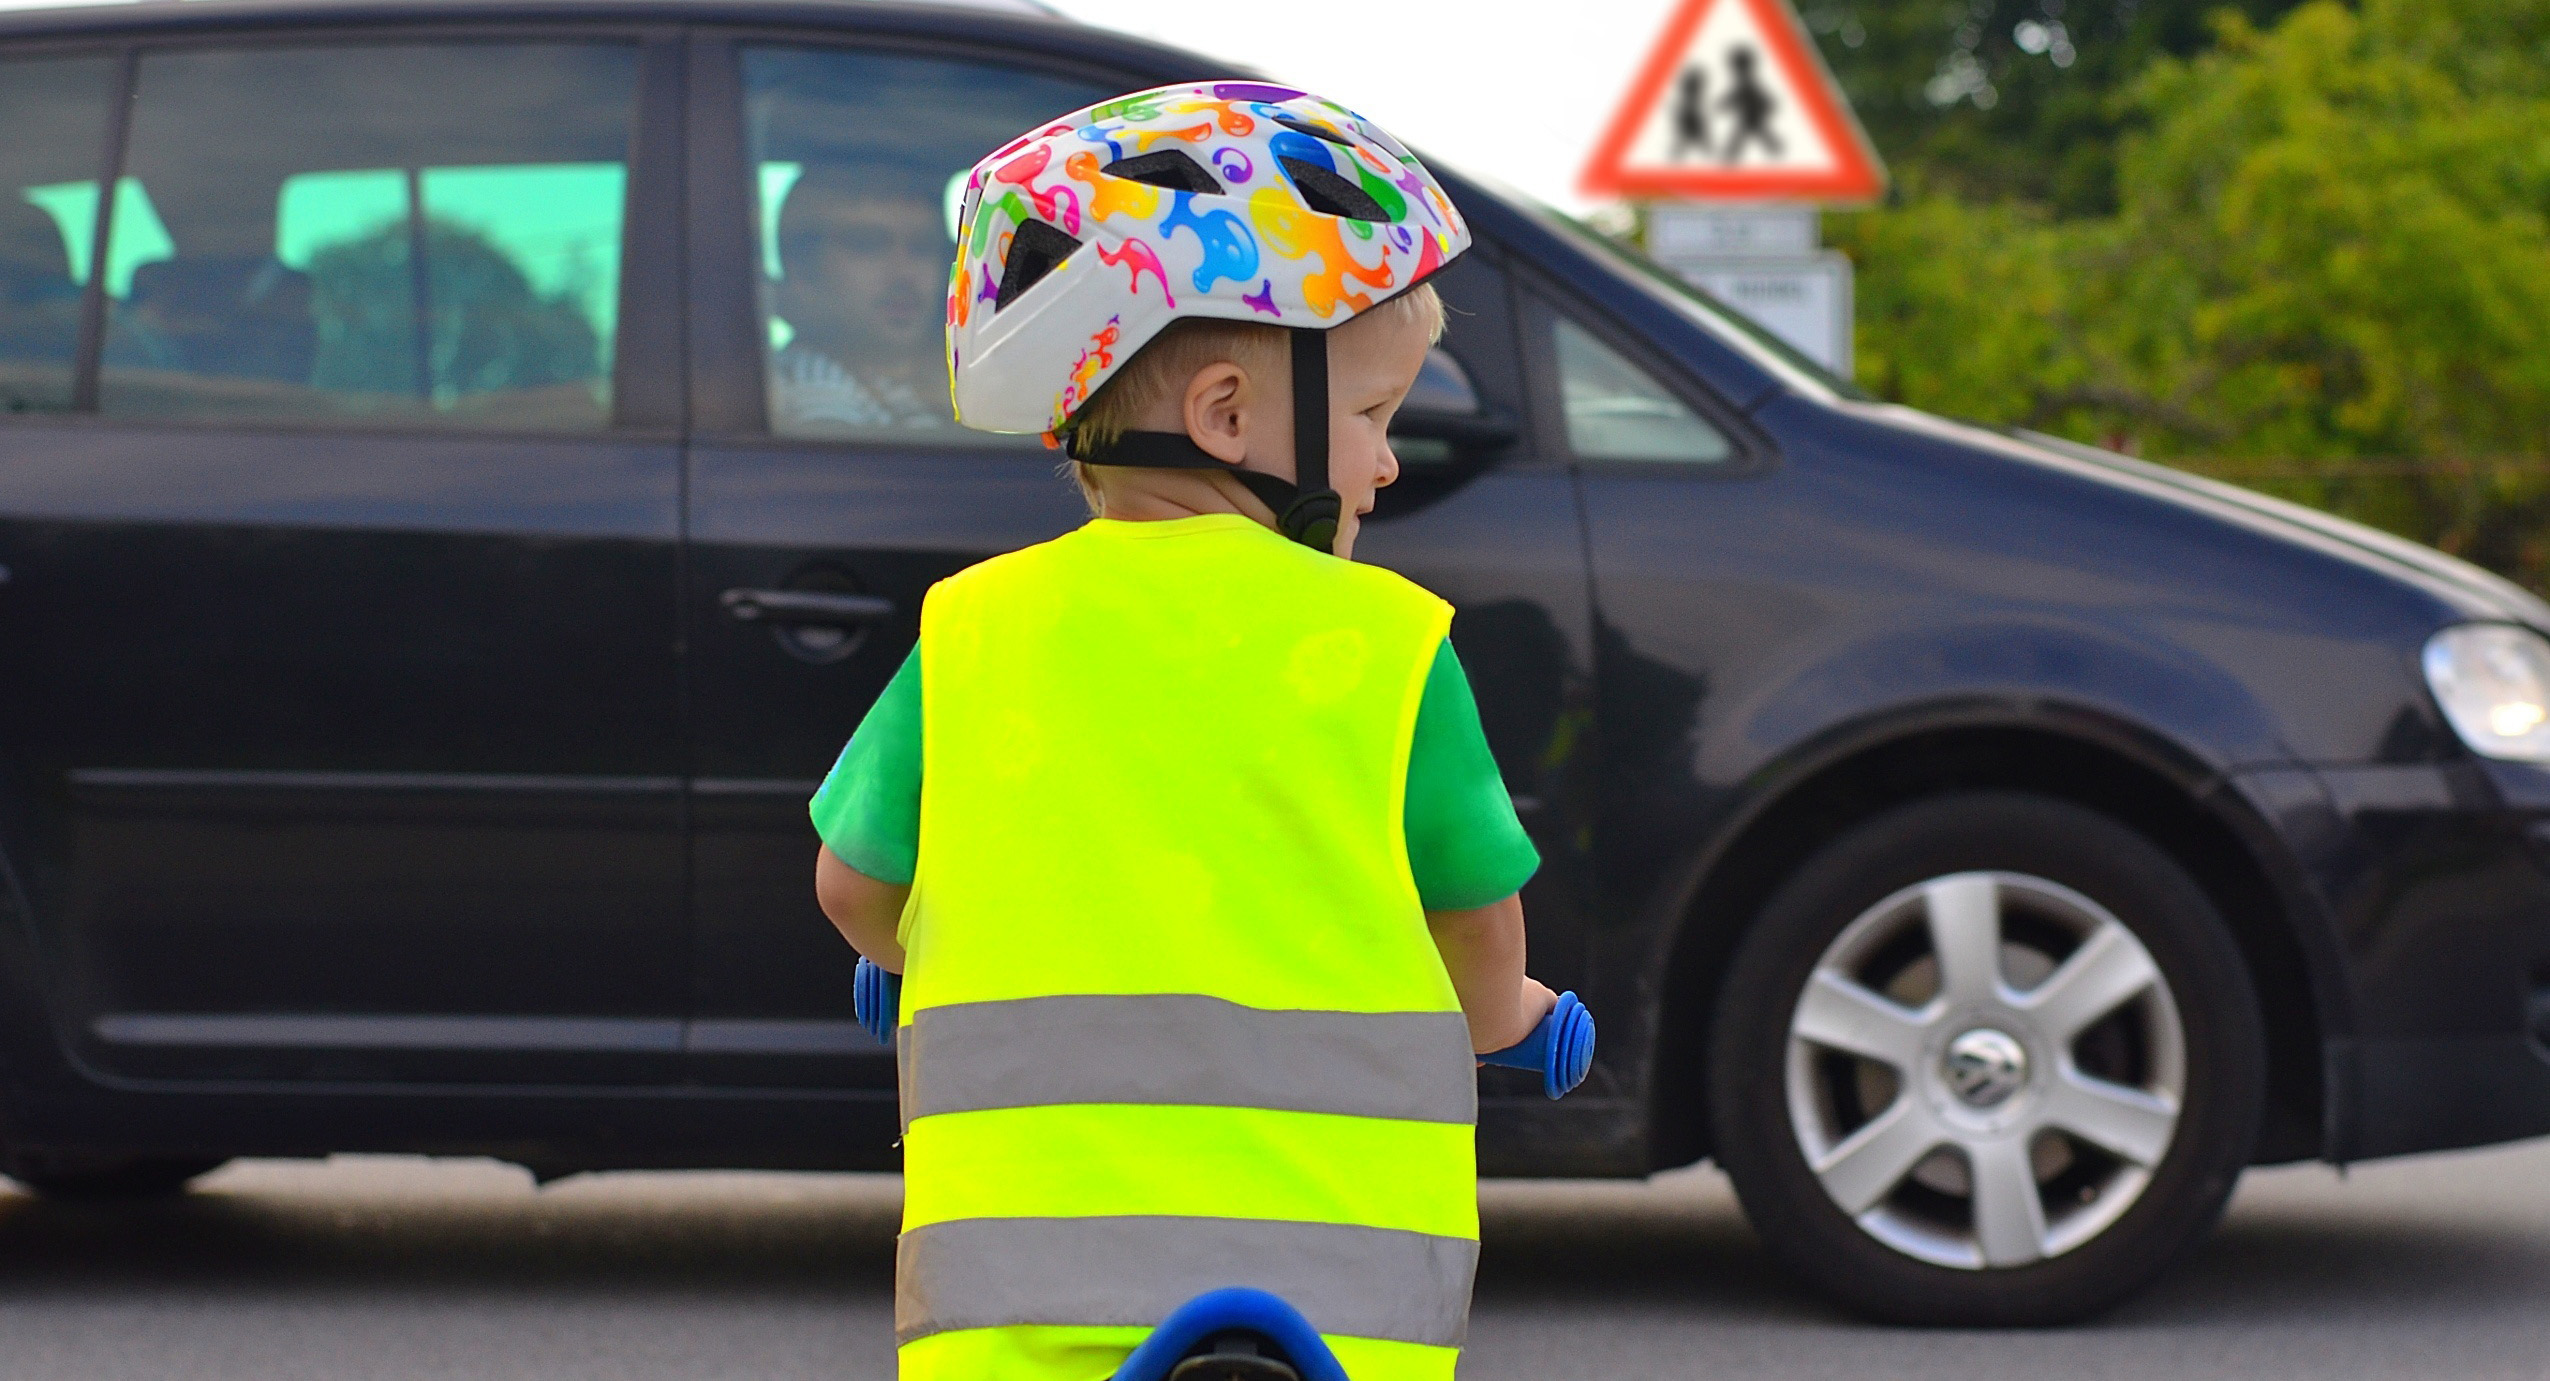 Child on bike in road